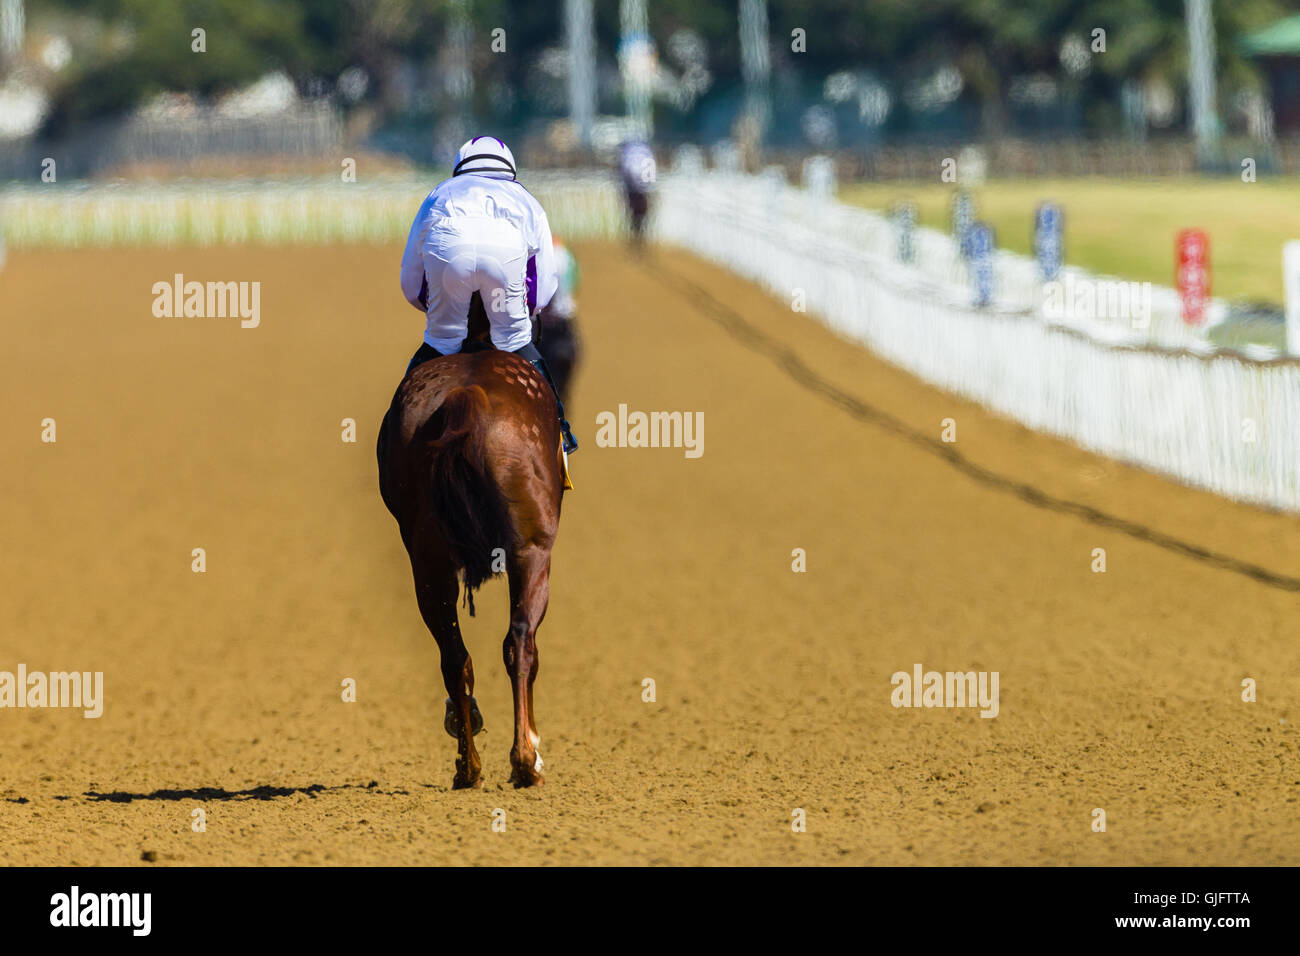 Race horse jockey down to starting gates on synthetic poly track Stock Photo